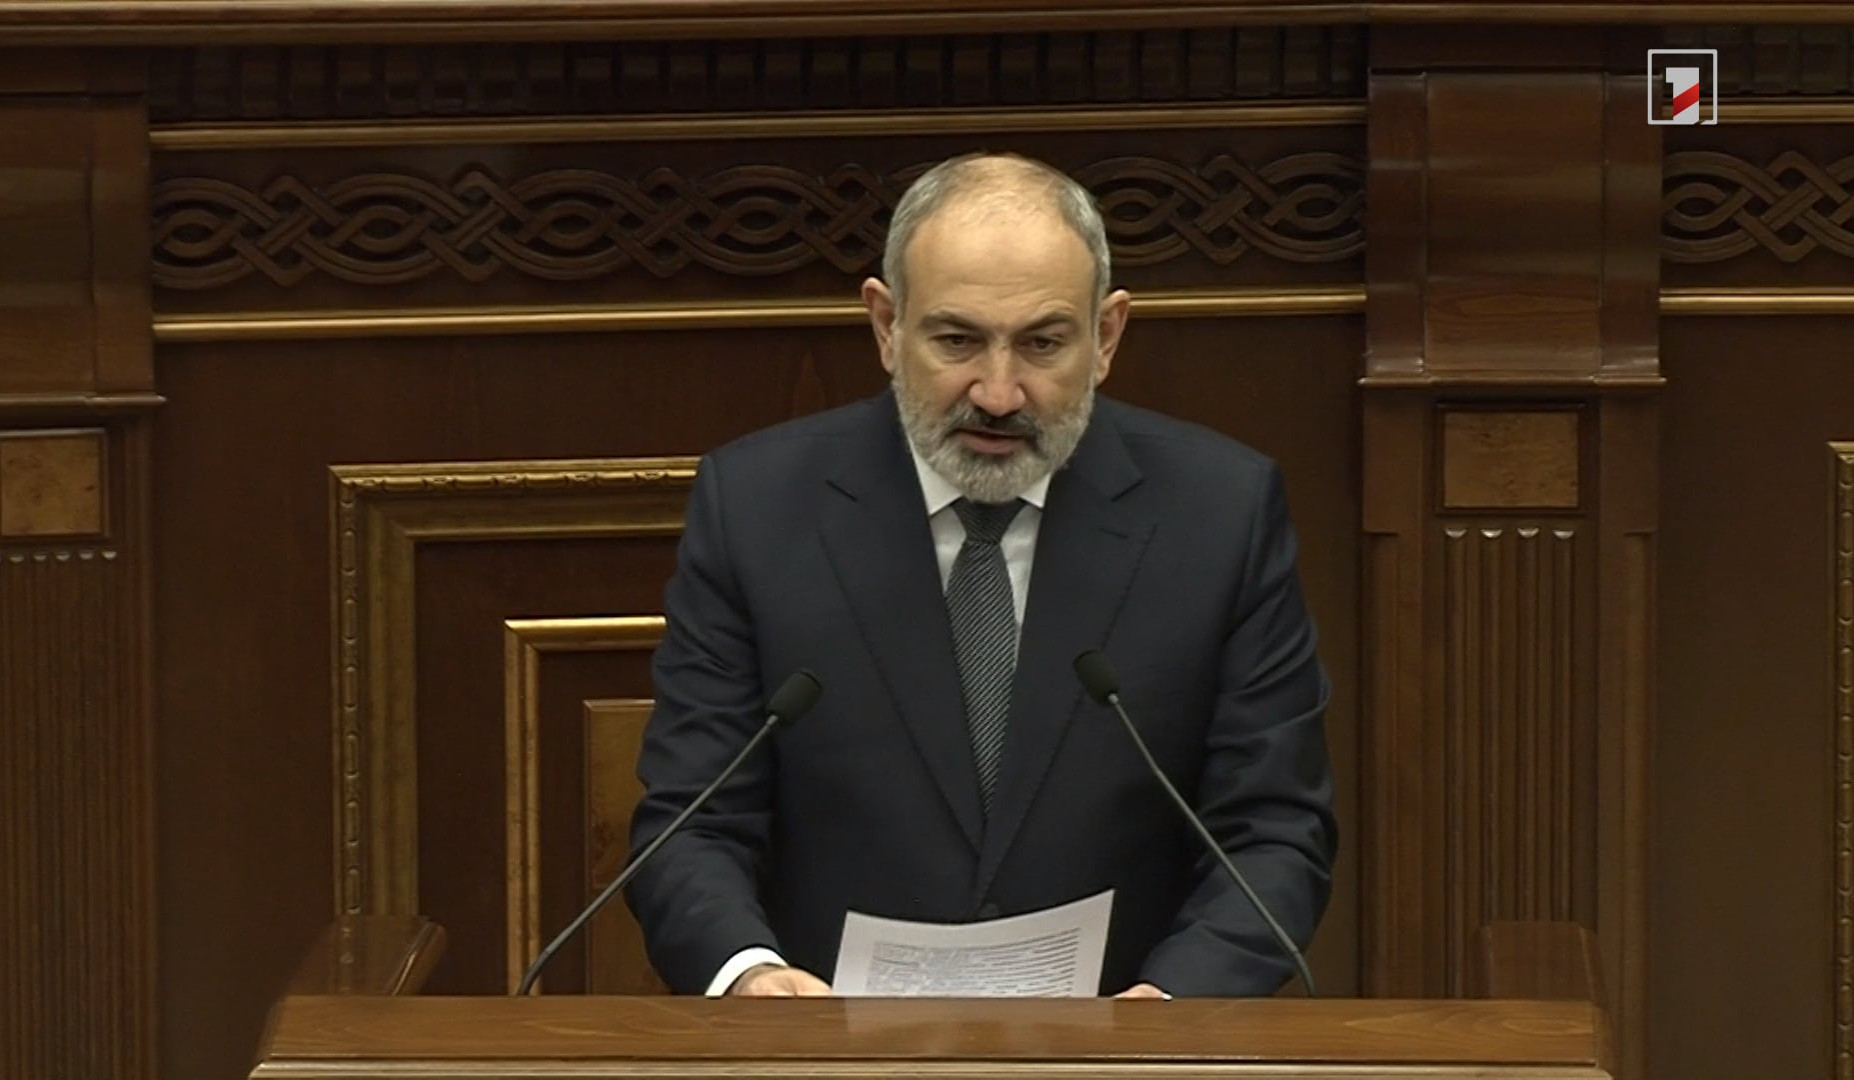 We are discussing issue of extending period of EU mission in Armenia for another two years: Nikol Pashinyan